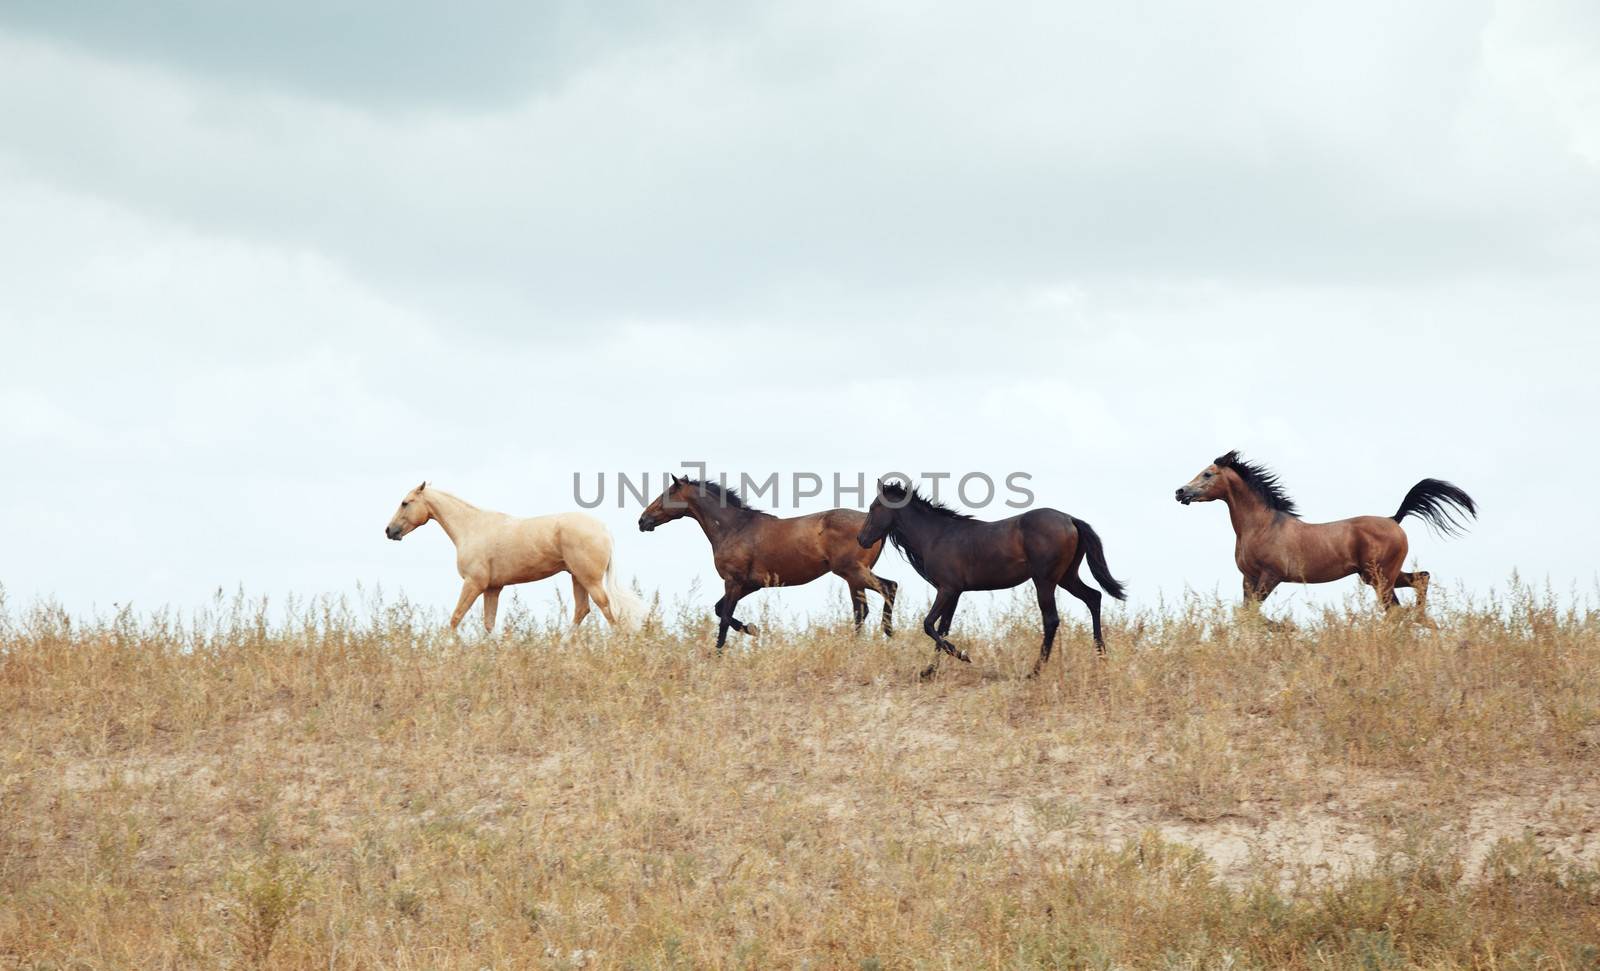 Four horses outdoors running in the steppe